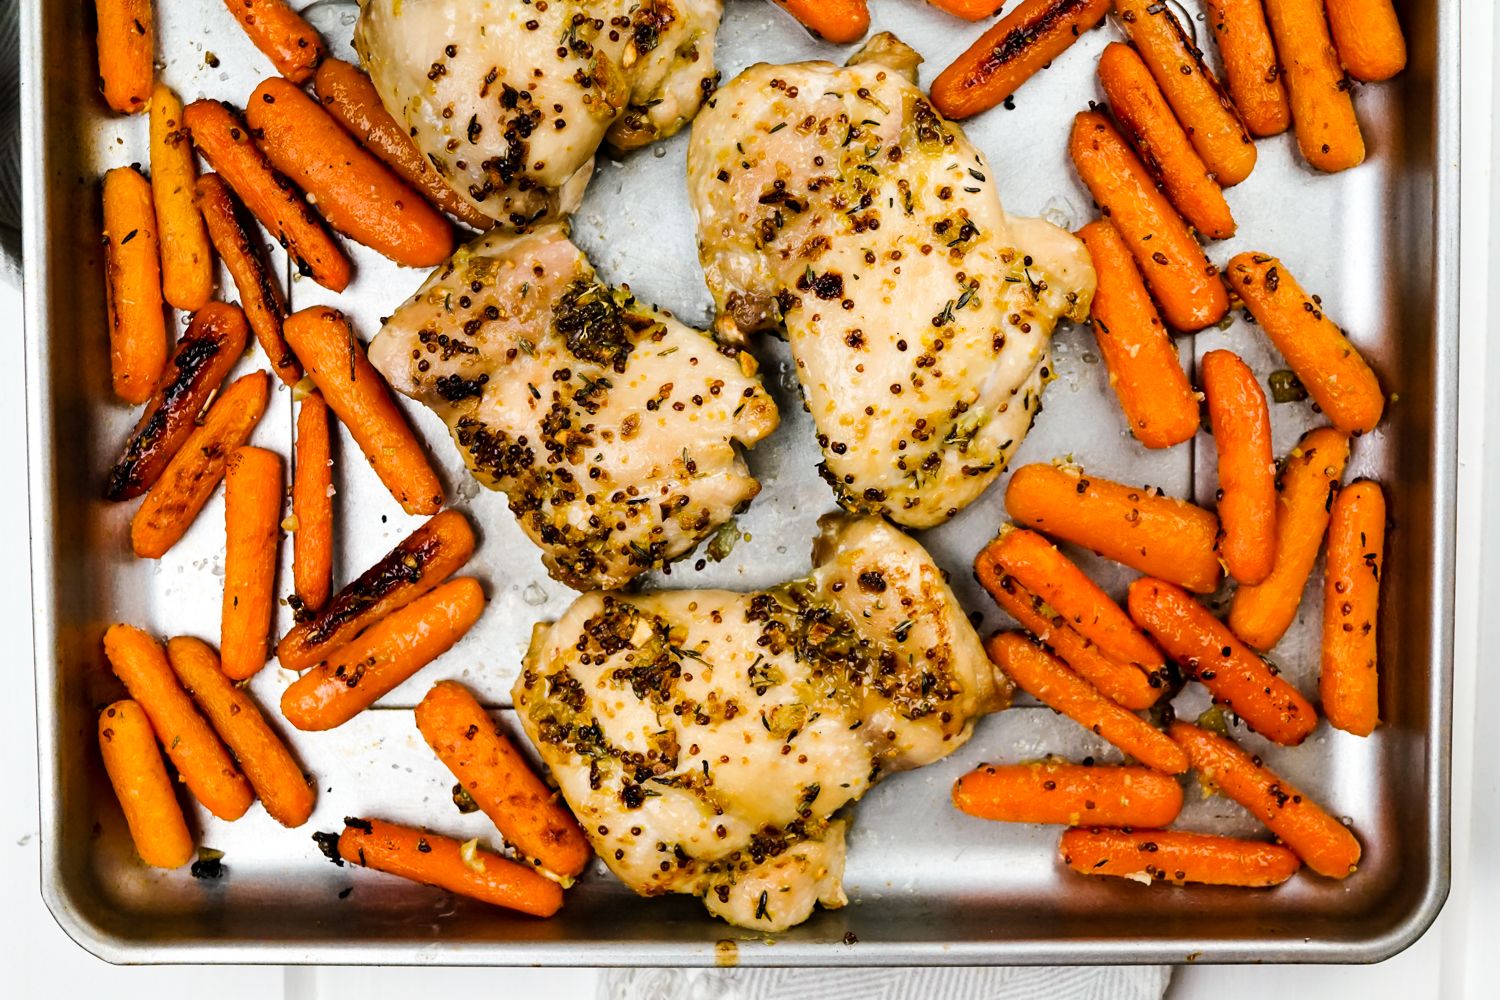 Honey mustard chicken and carrots cooked on a single sheet pan.